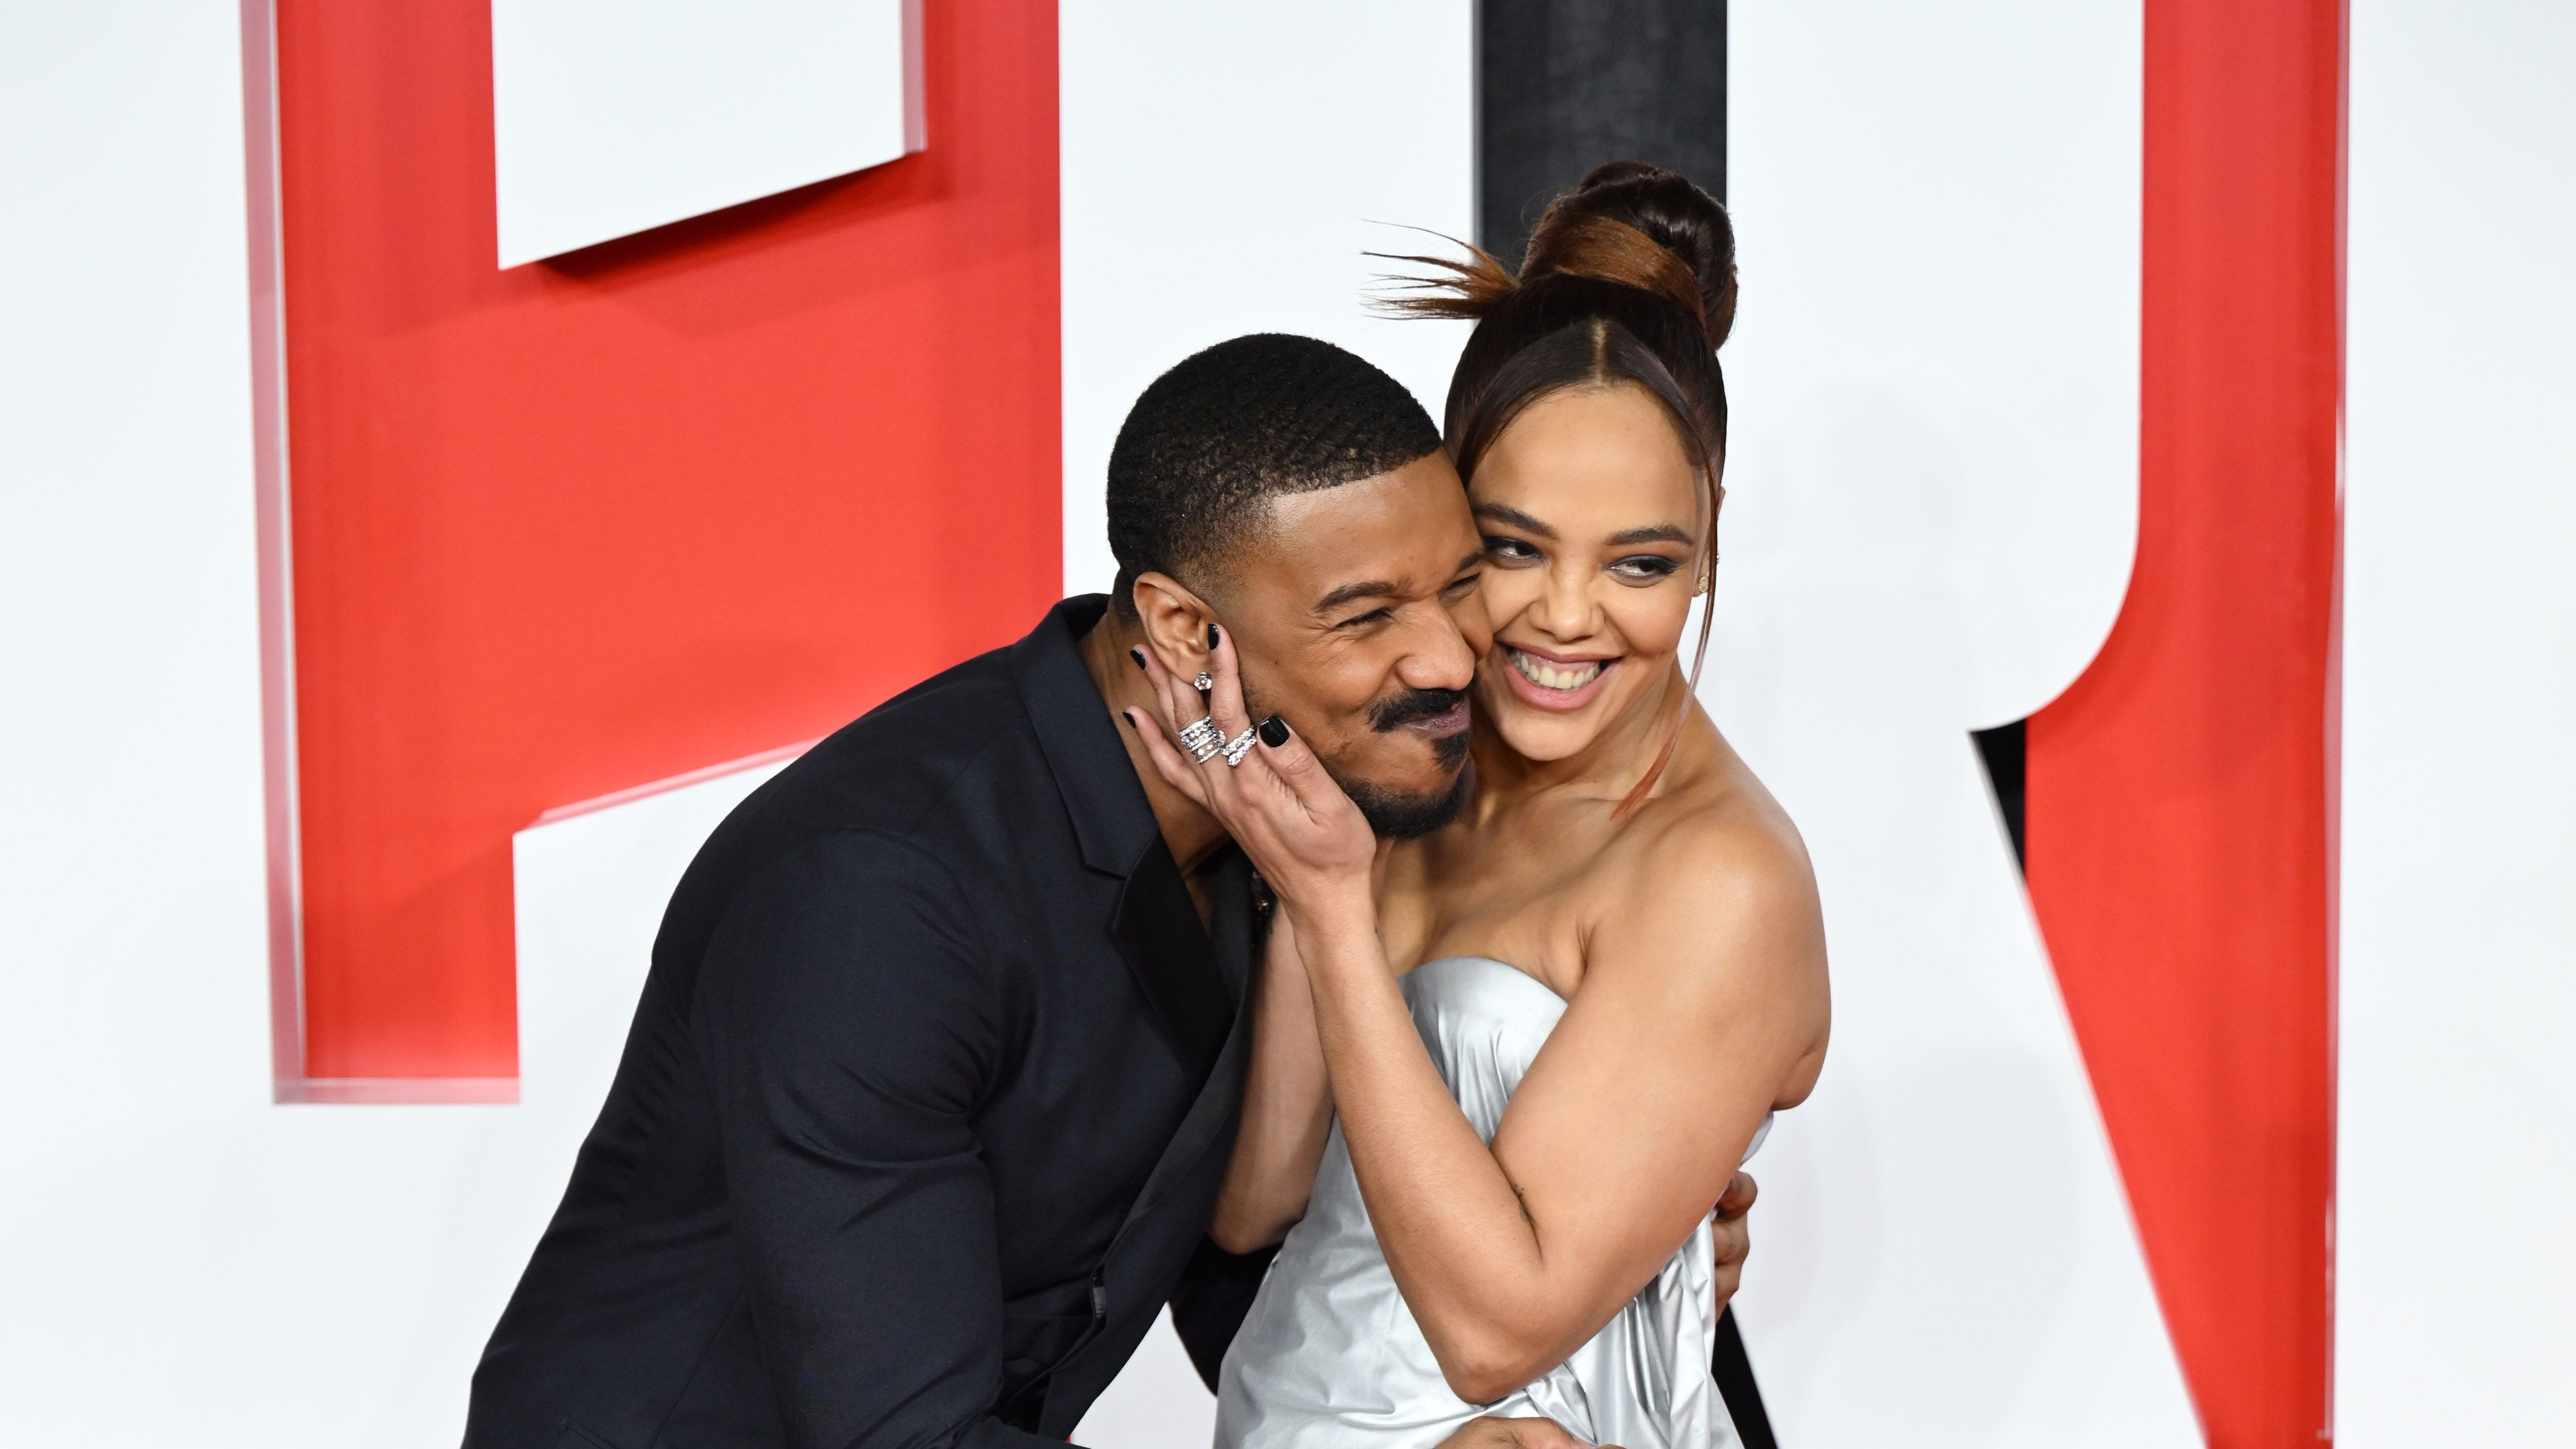 Tessa Thompson on Michael B Jordan, couples therapy as Creed characters